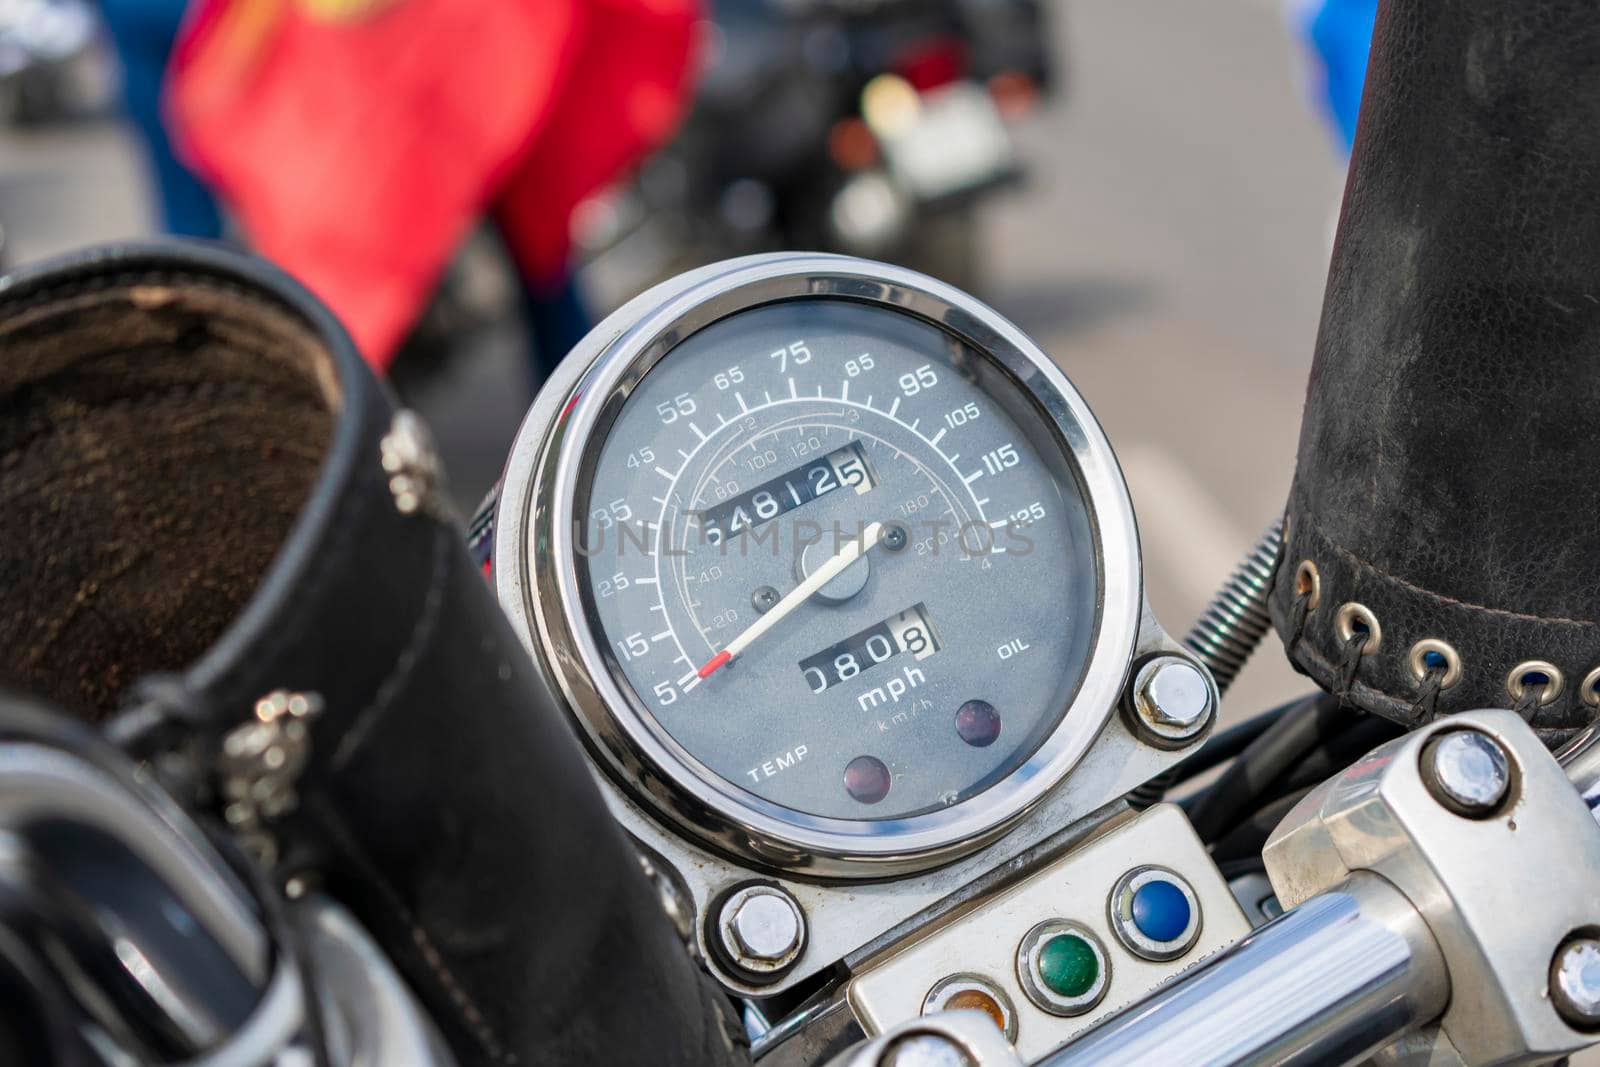 Analog speedometer of a powerful motorcycle in a shiny finish close-up